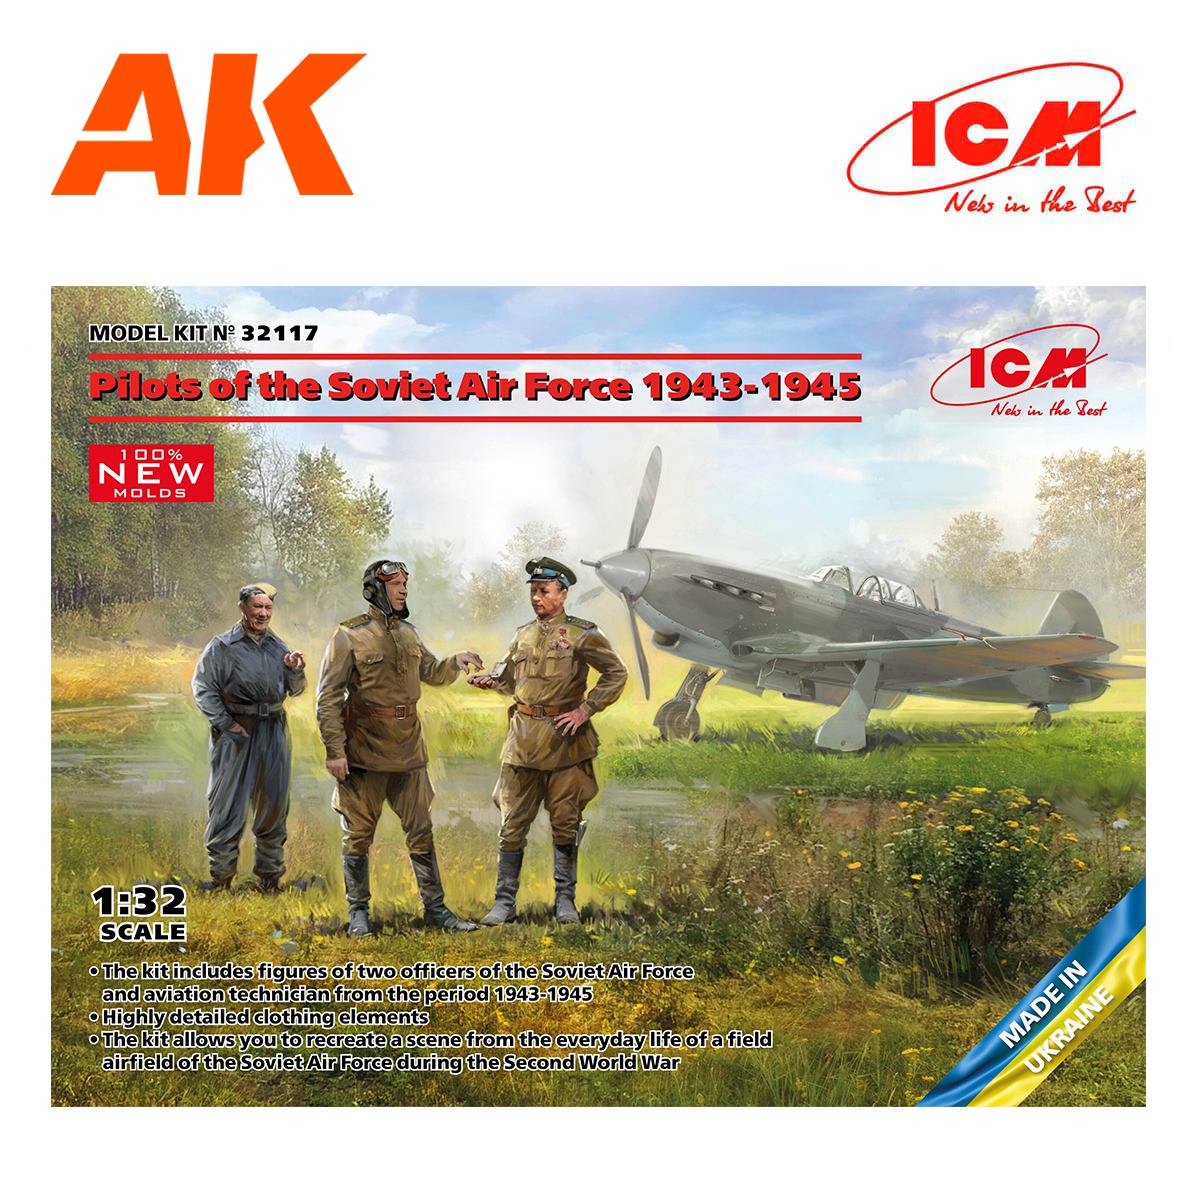 Pilots of the Soviet Air Force 1943-1945 (100% new molds) 1/32